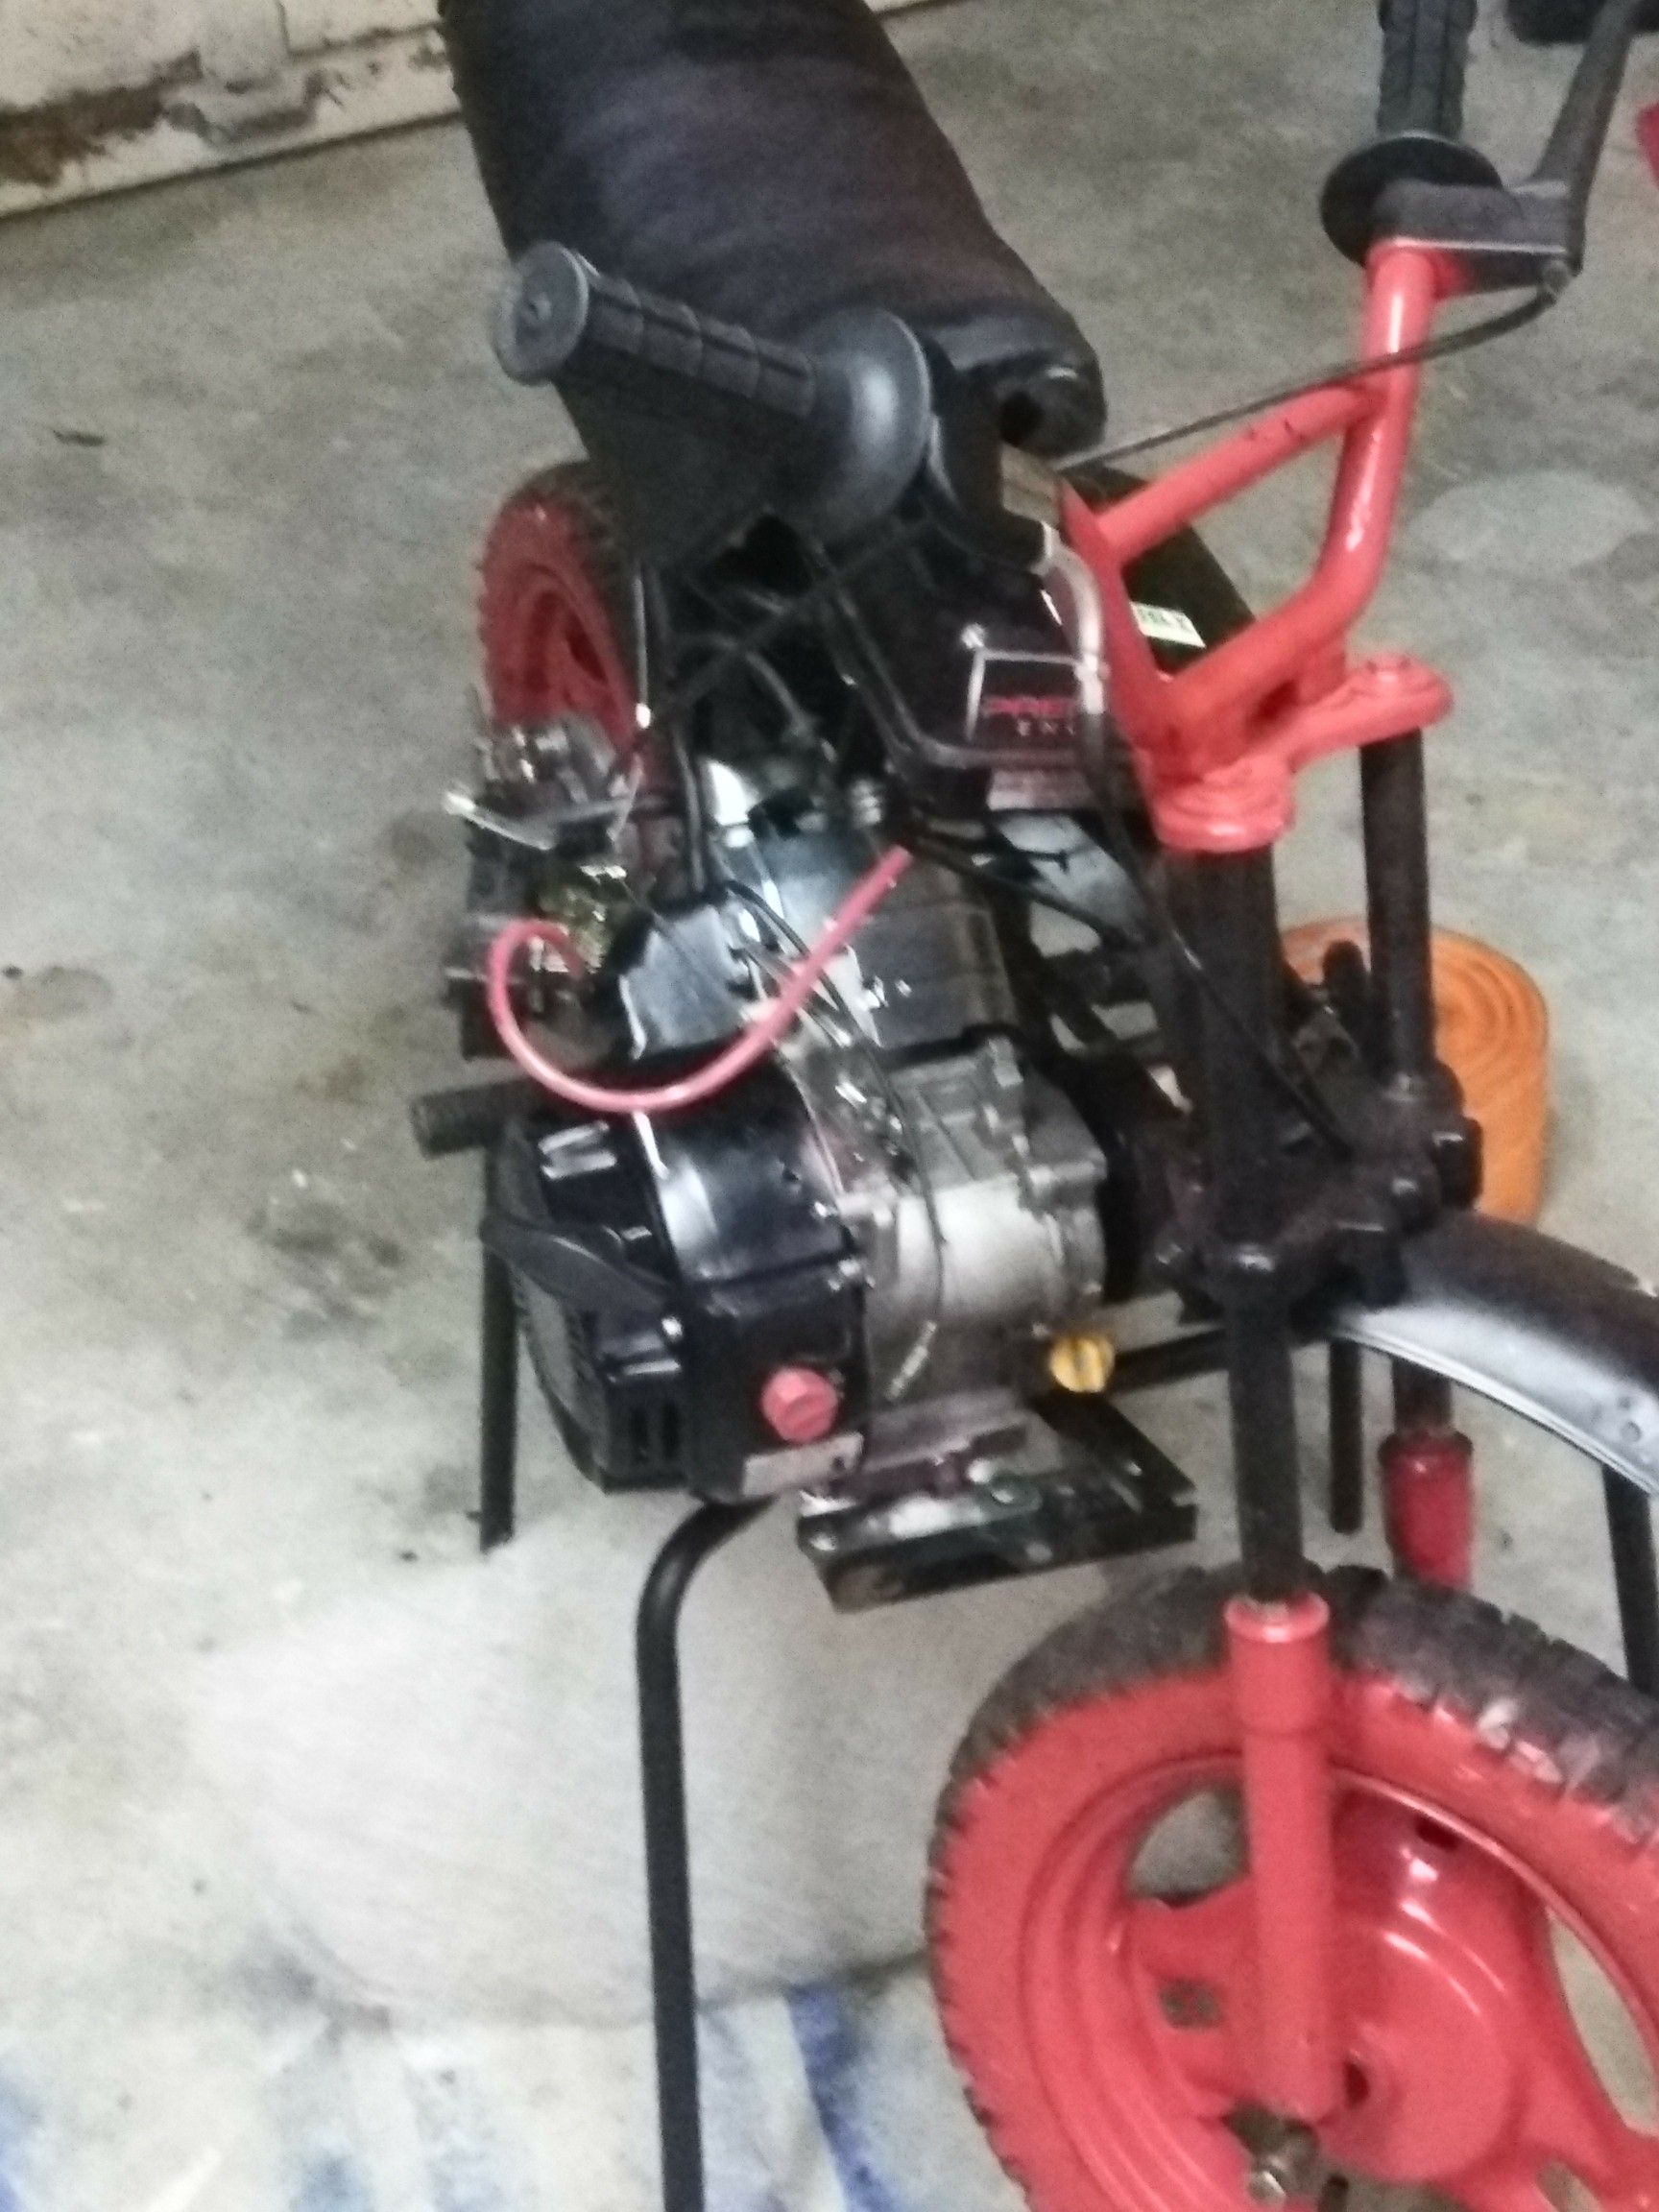 Mini bike 79cc fast sell or trade, Governor took off also needs a clutch